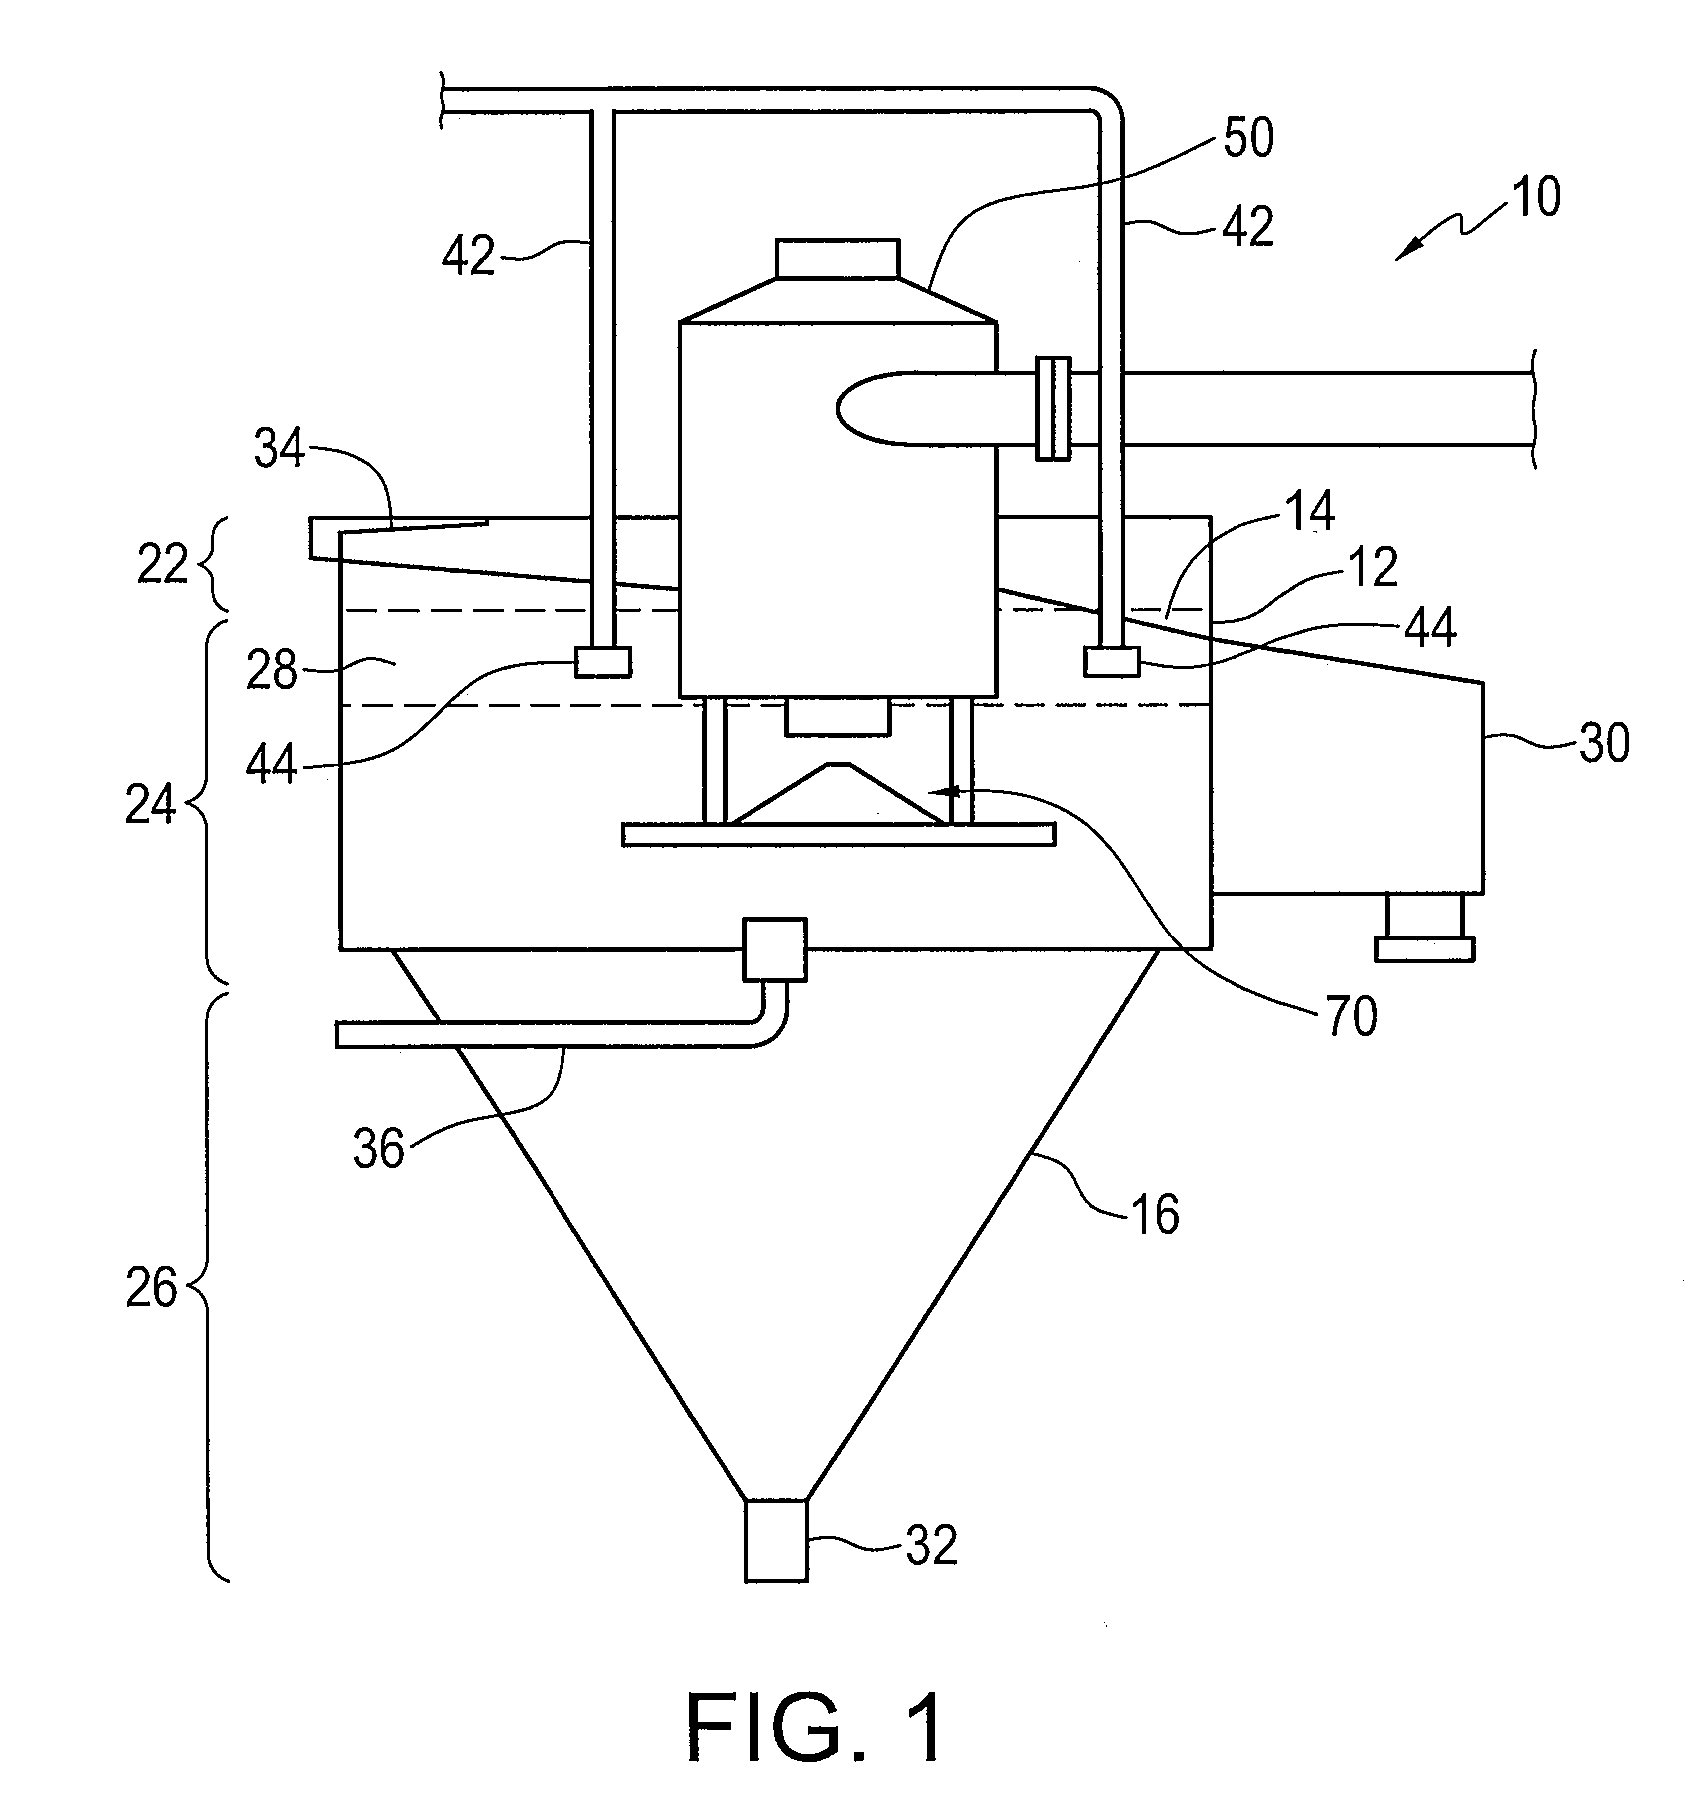 Feedwell for a gravity separation vessel